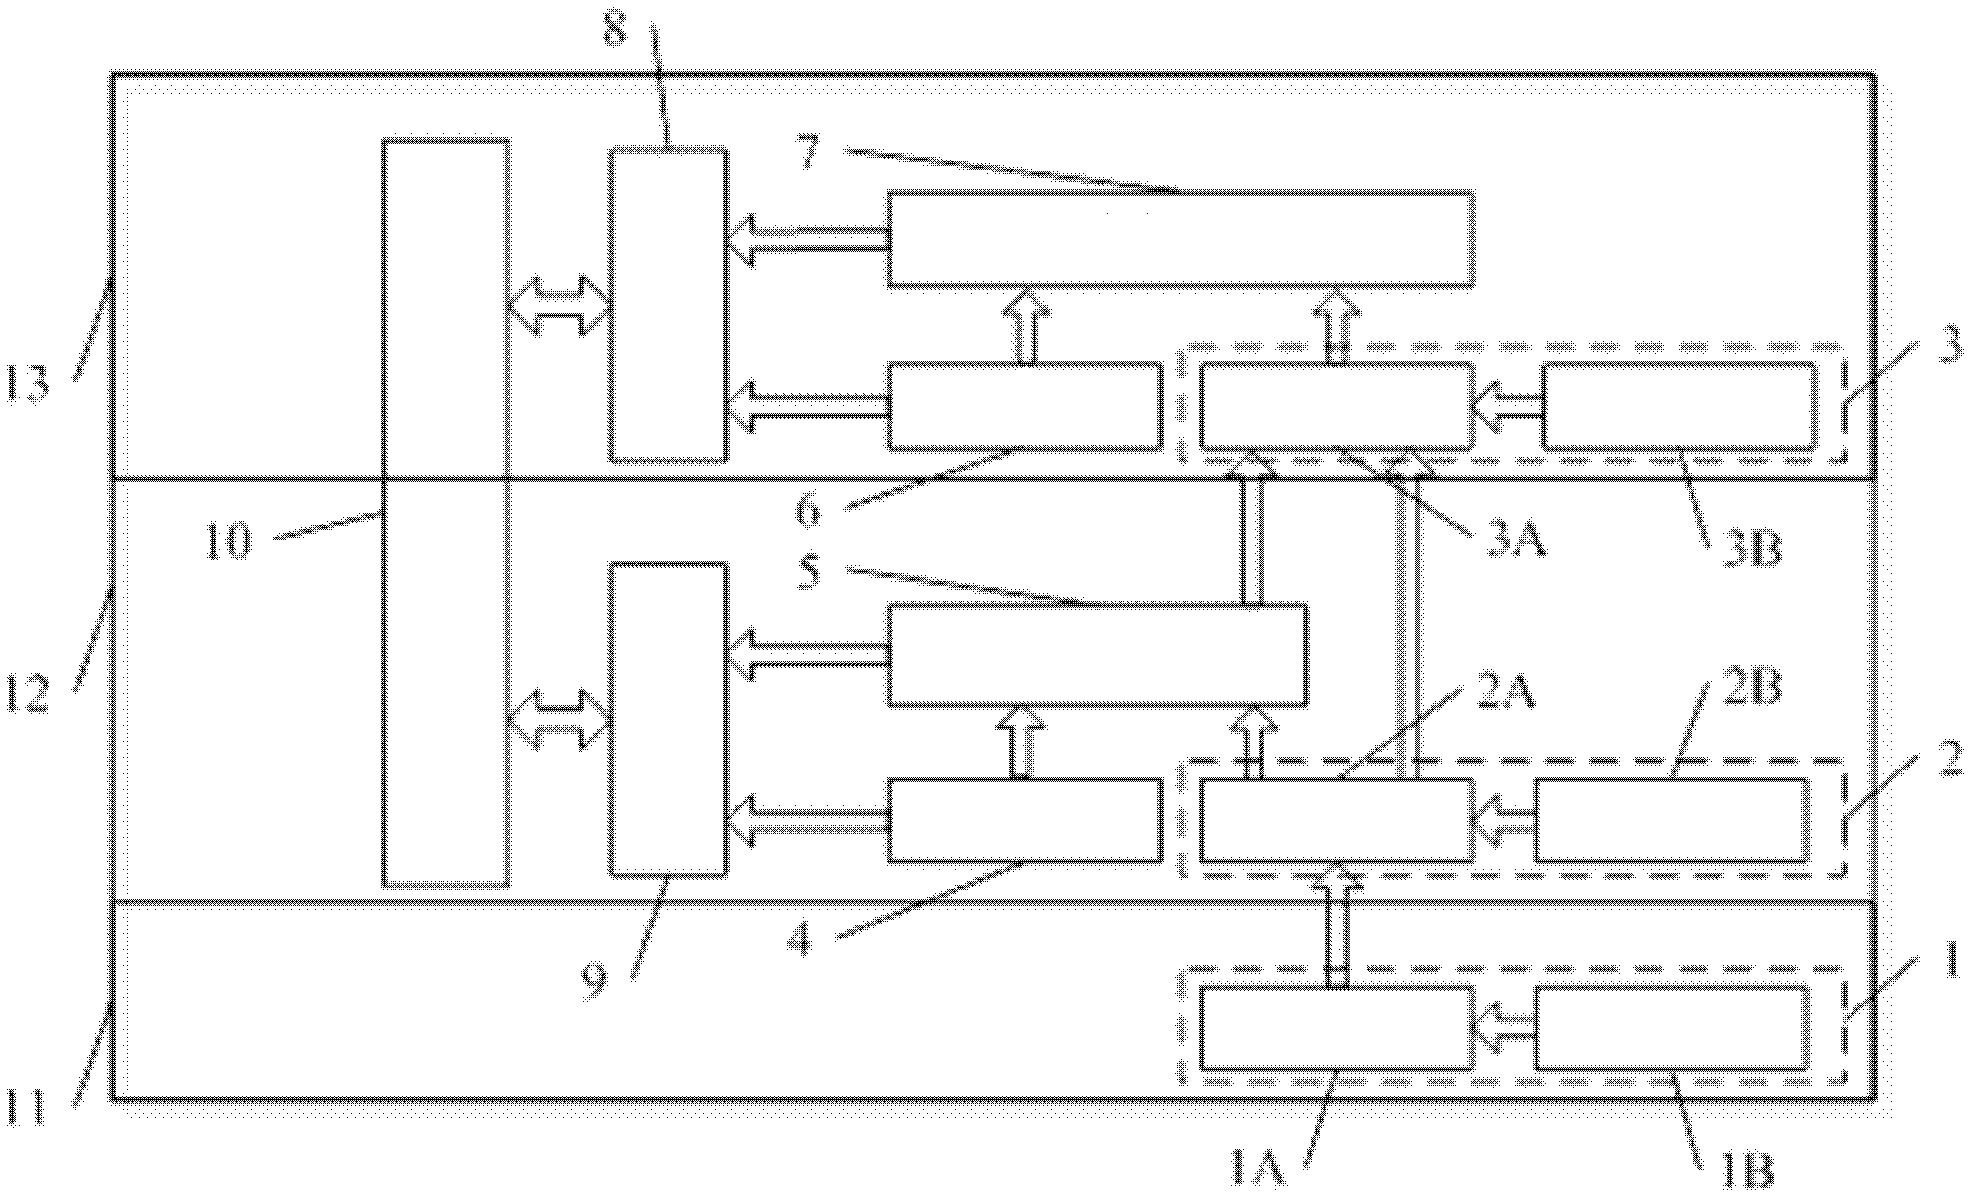 Service combination reconstruction method under dynamic network environment